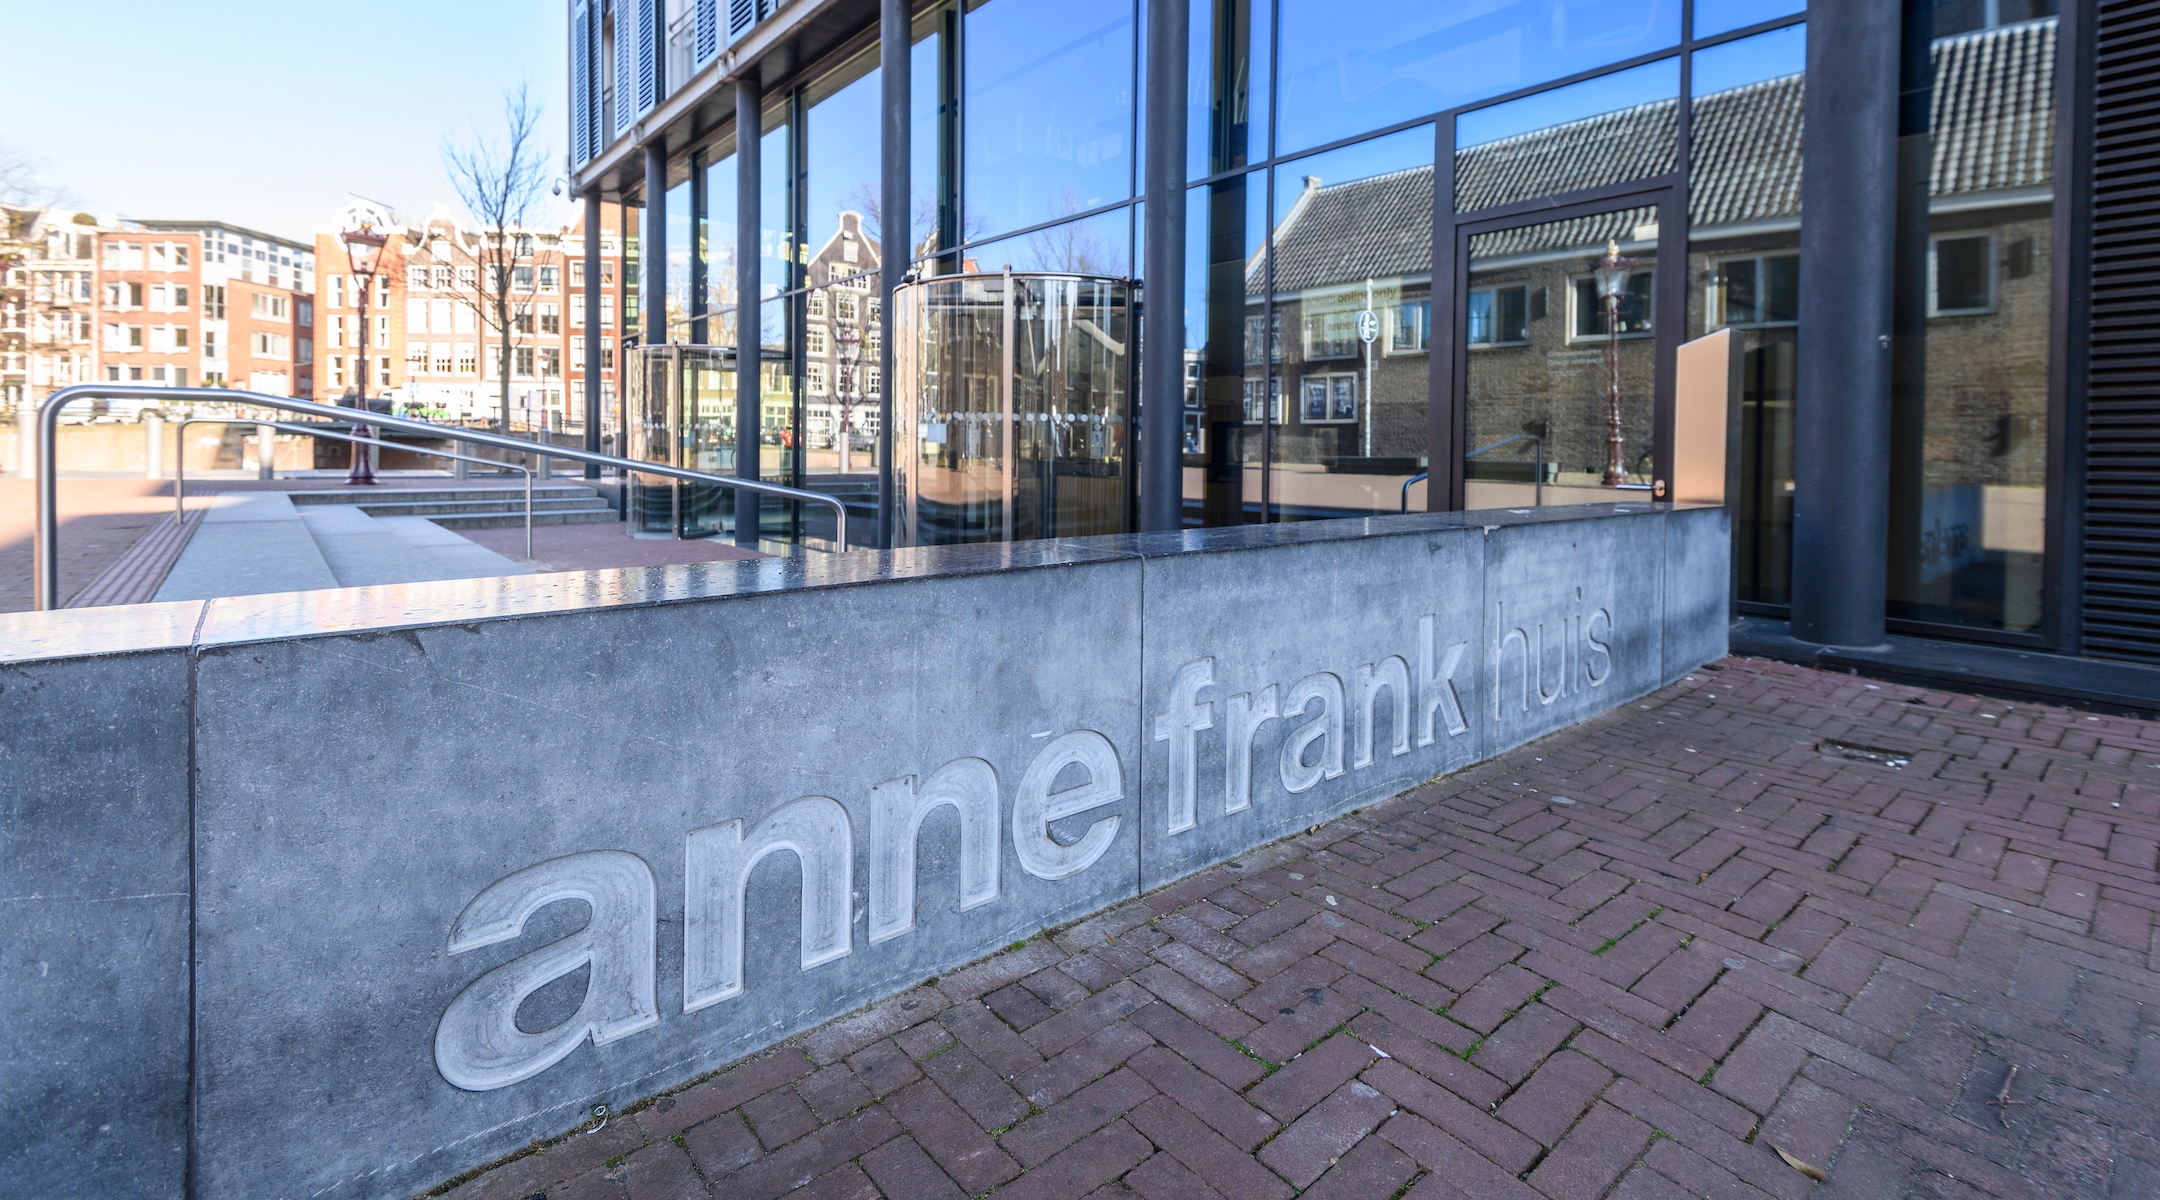 Outside of Anne Frank House in Amsterdam